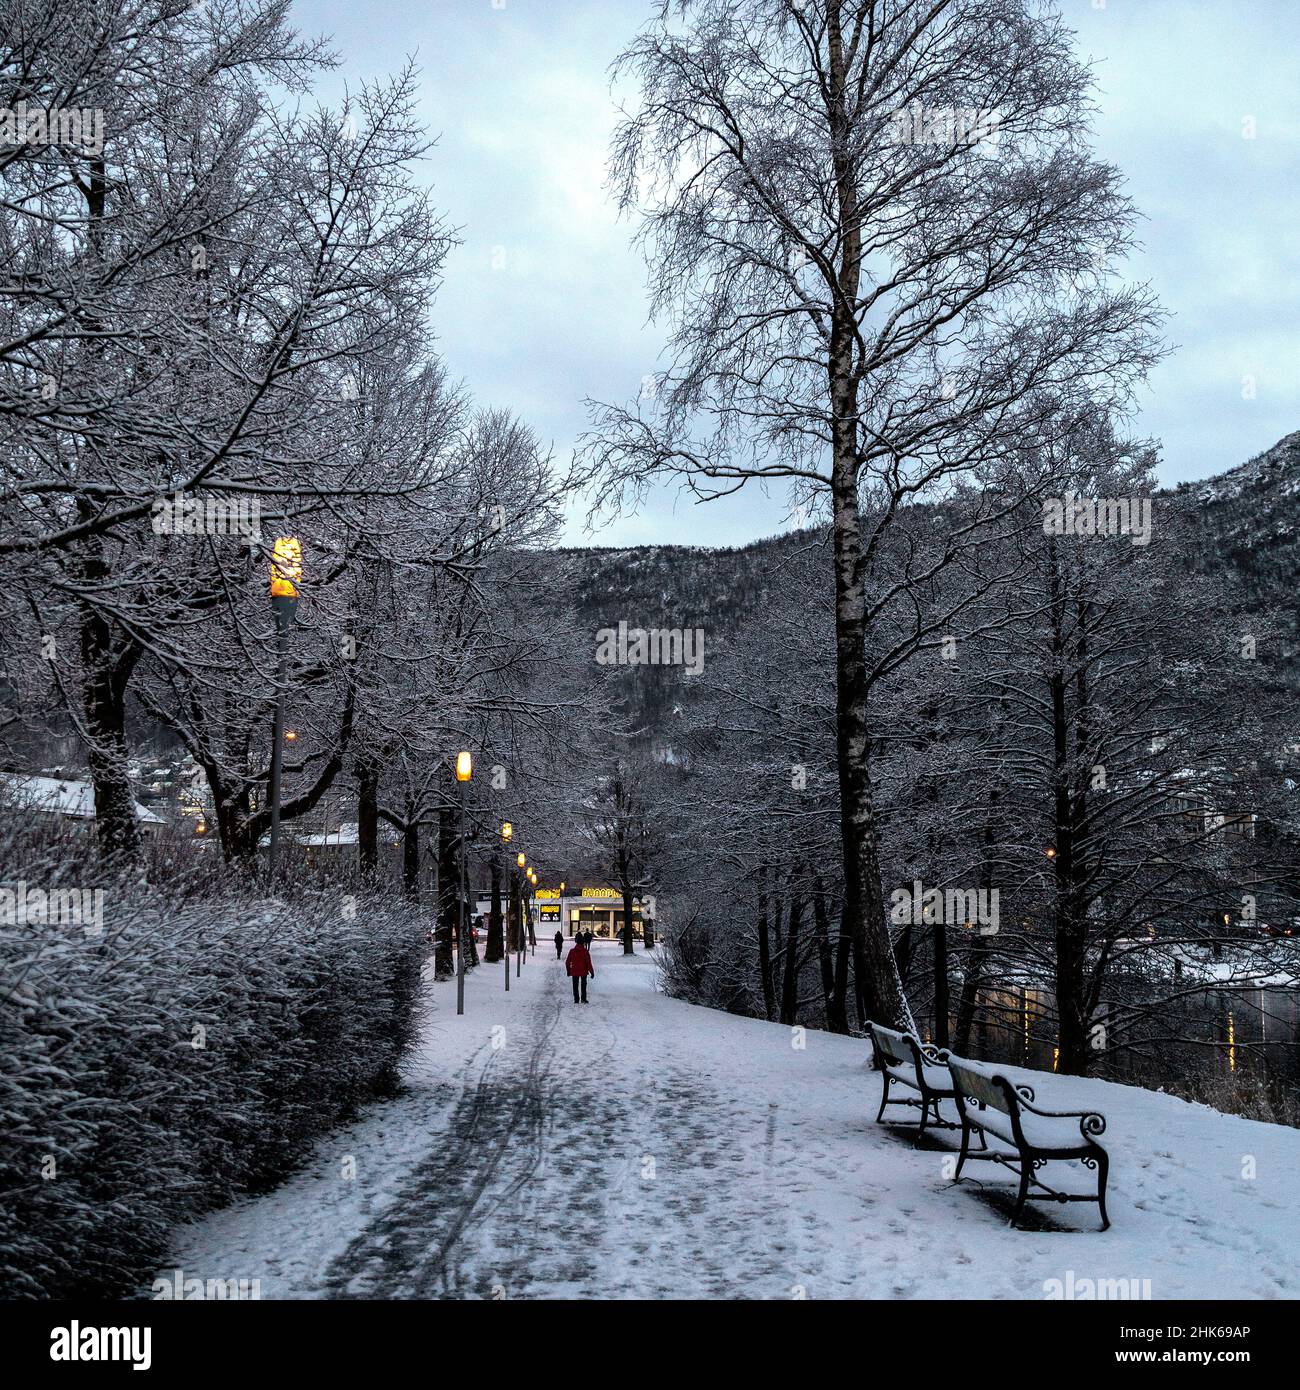 Winter at Tveitevannet lake, Sletten, Bergen, Norway. People walking along the path around the lake, a winter evening. Stock Photo